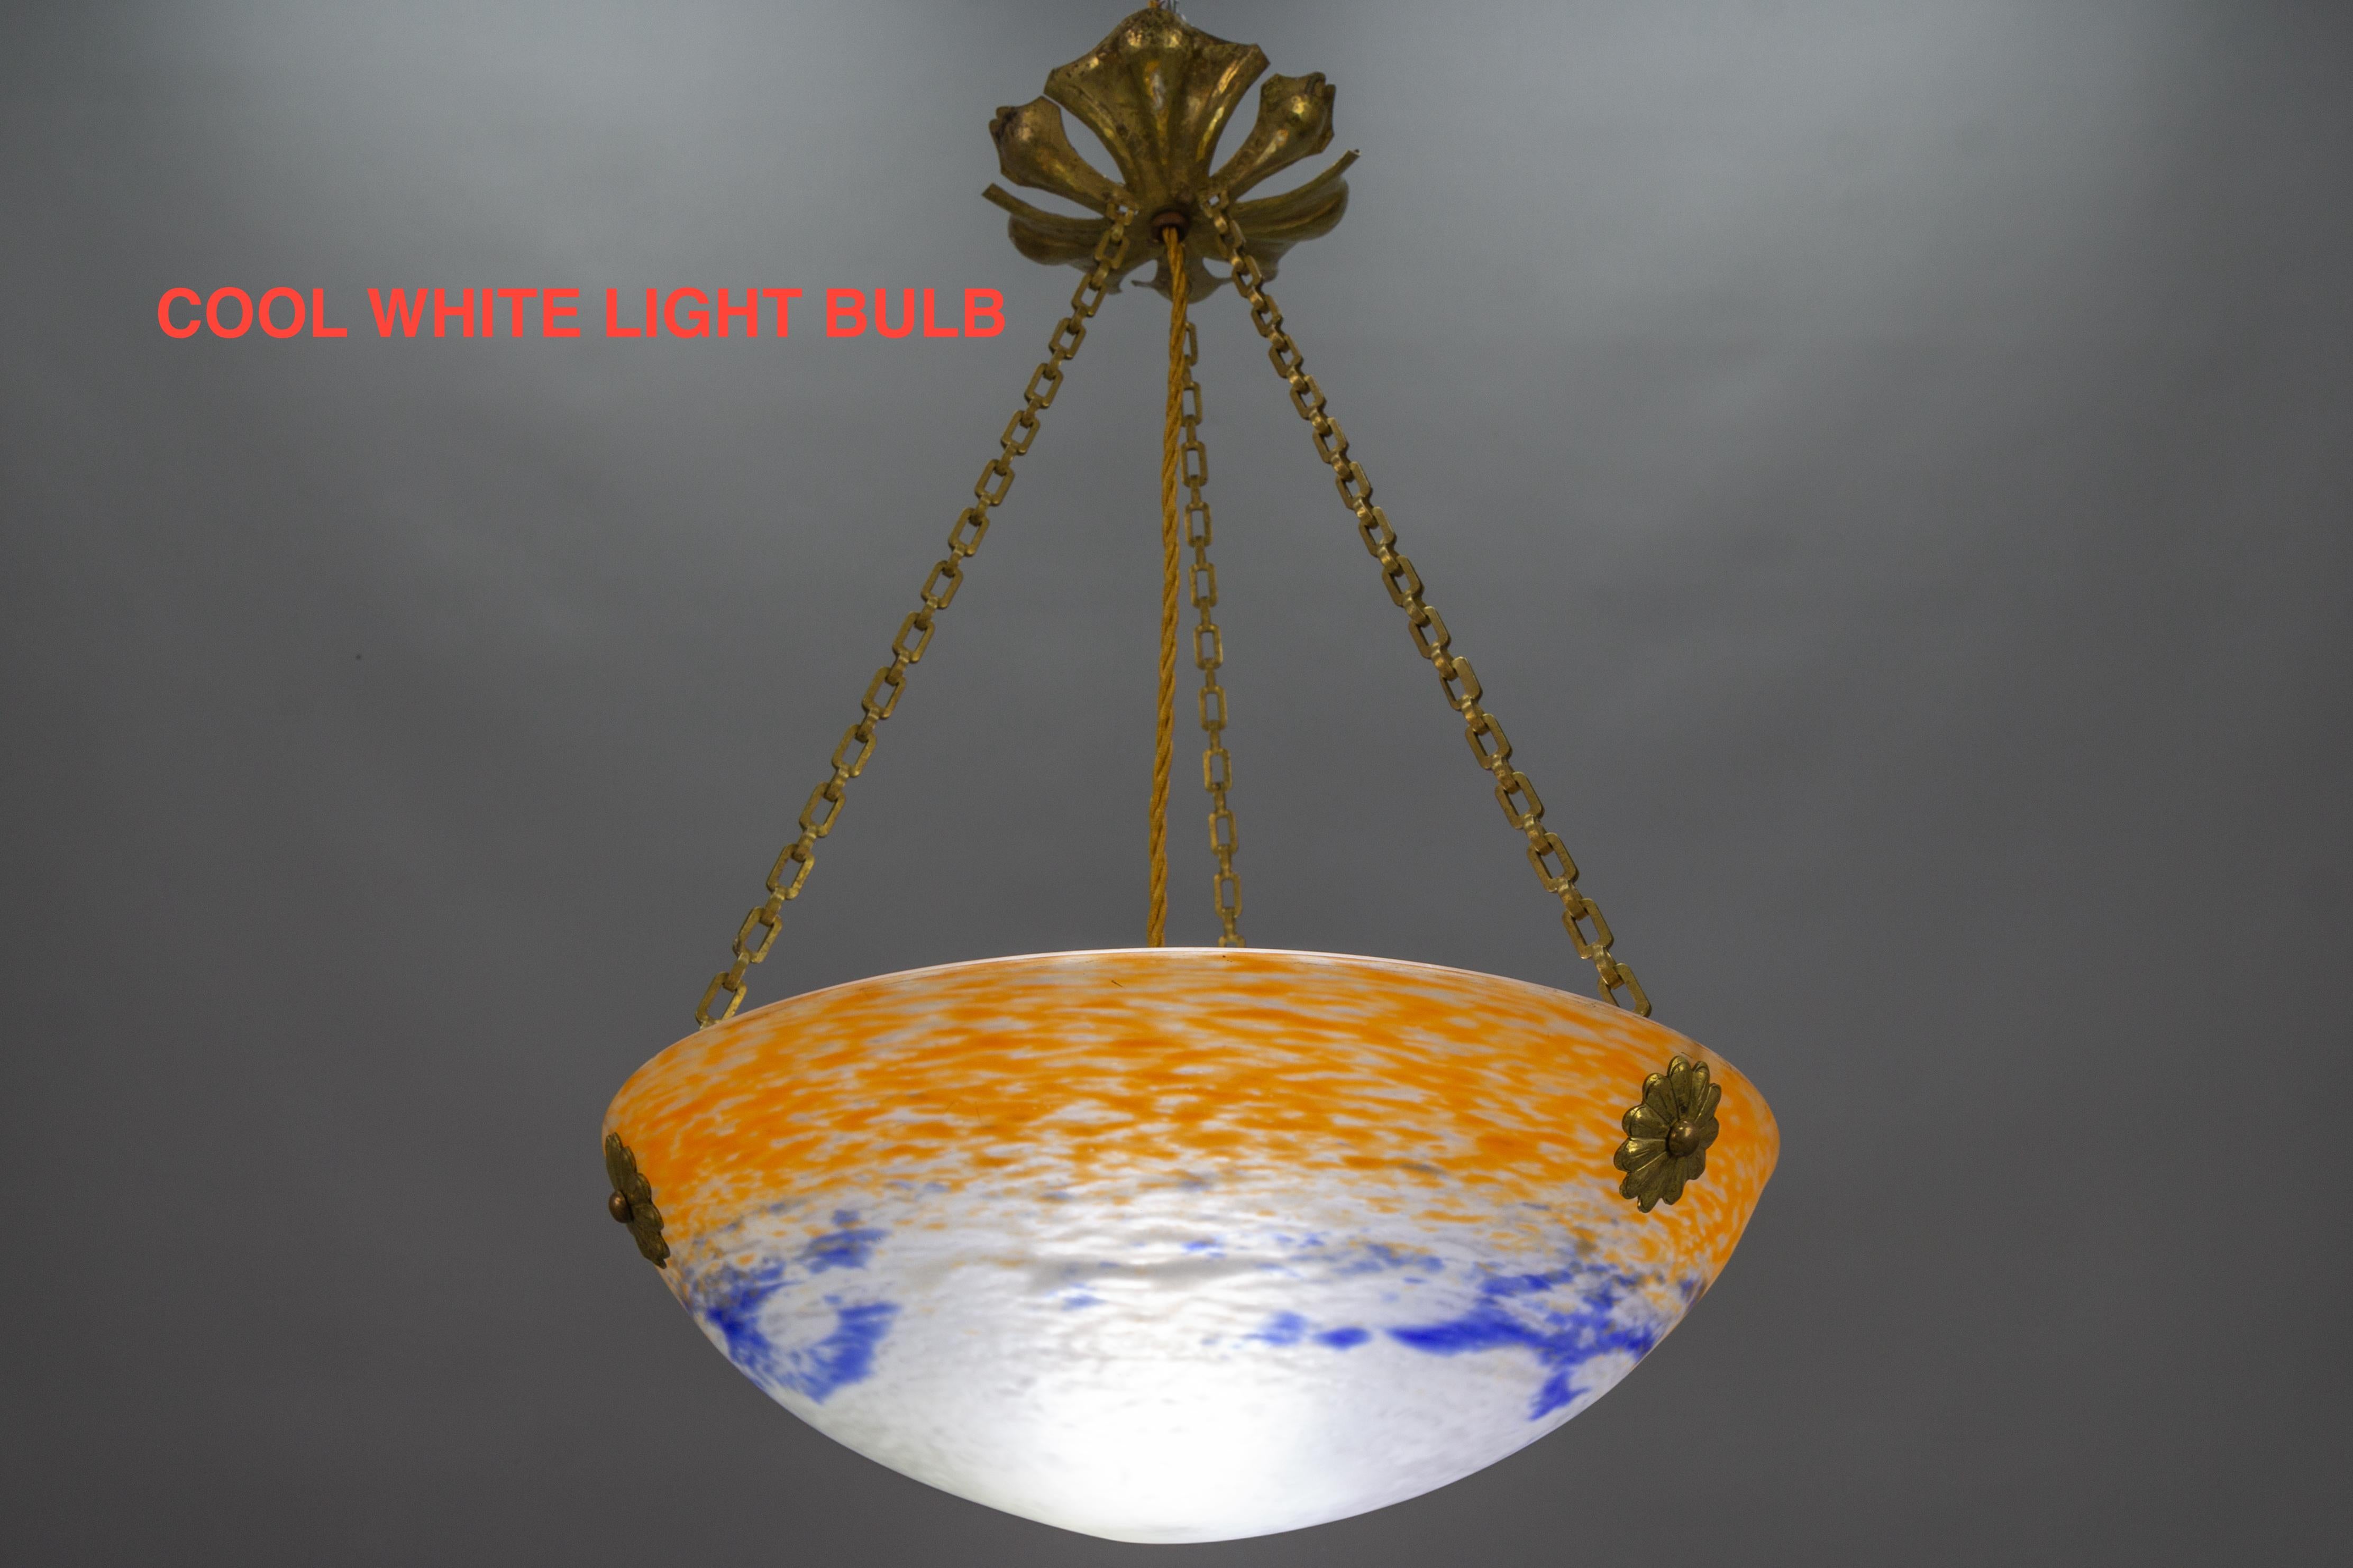 French Art Nouveau Orange, White and Blue Glass Pendant Light by Noverdy, 1920s For Sale 1